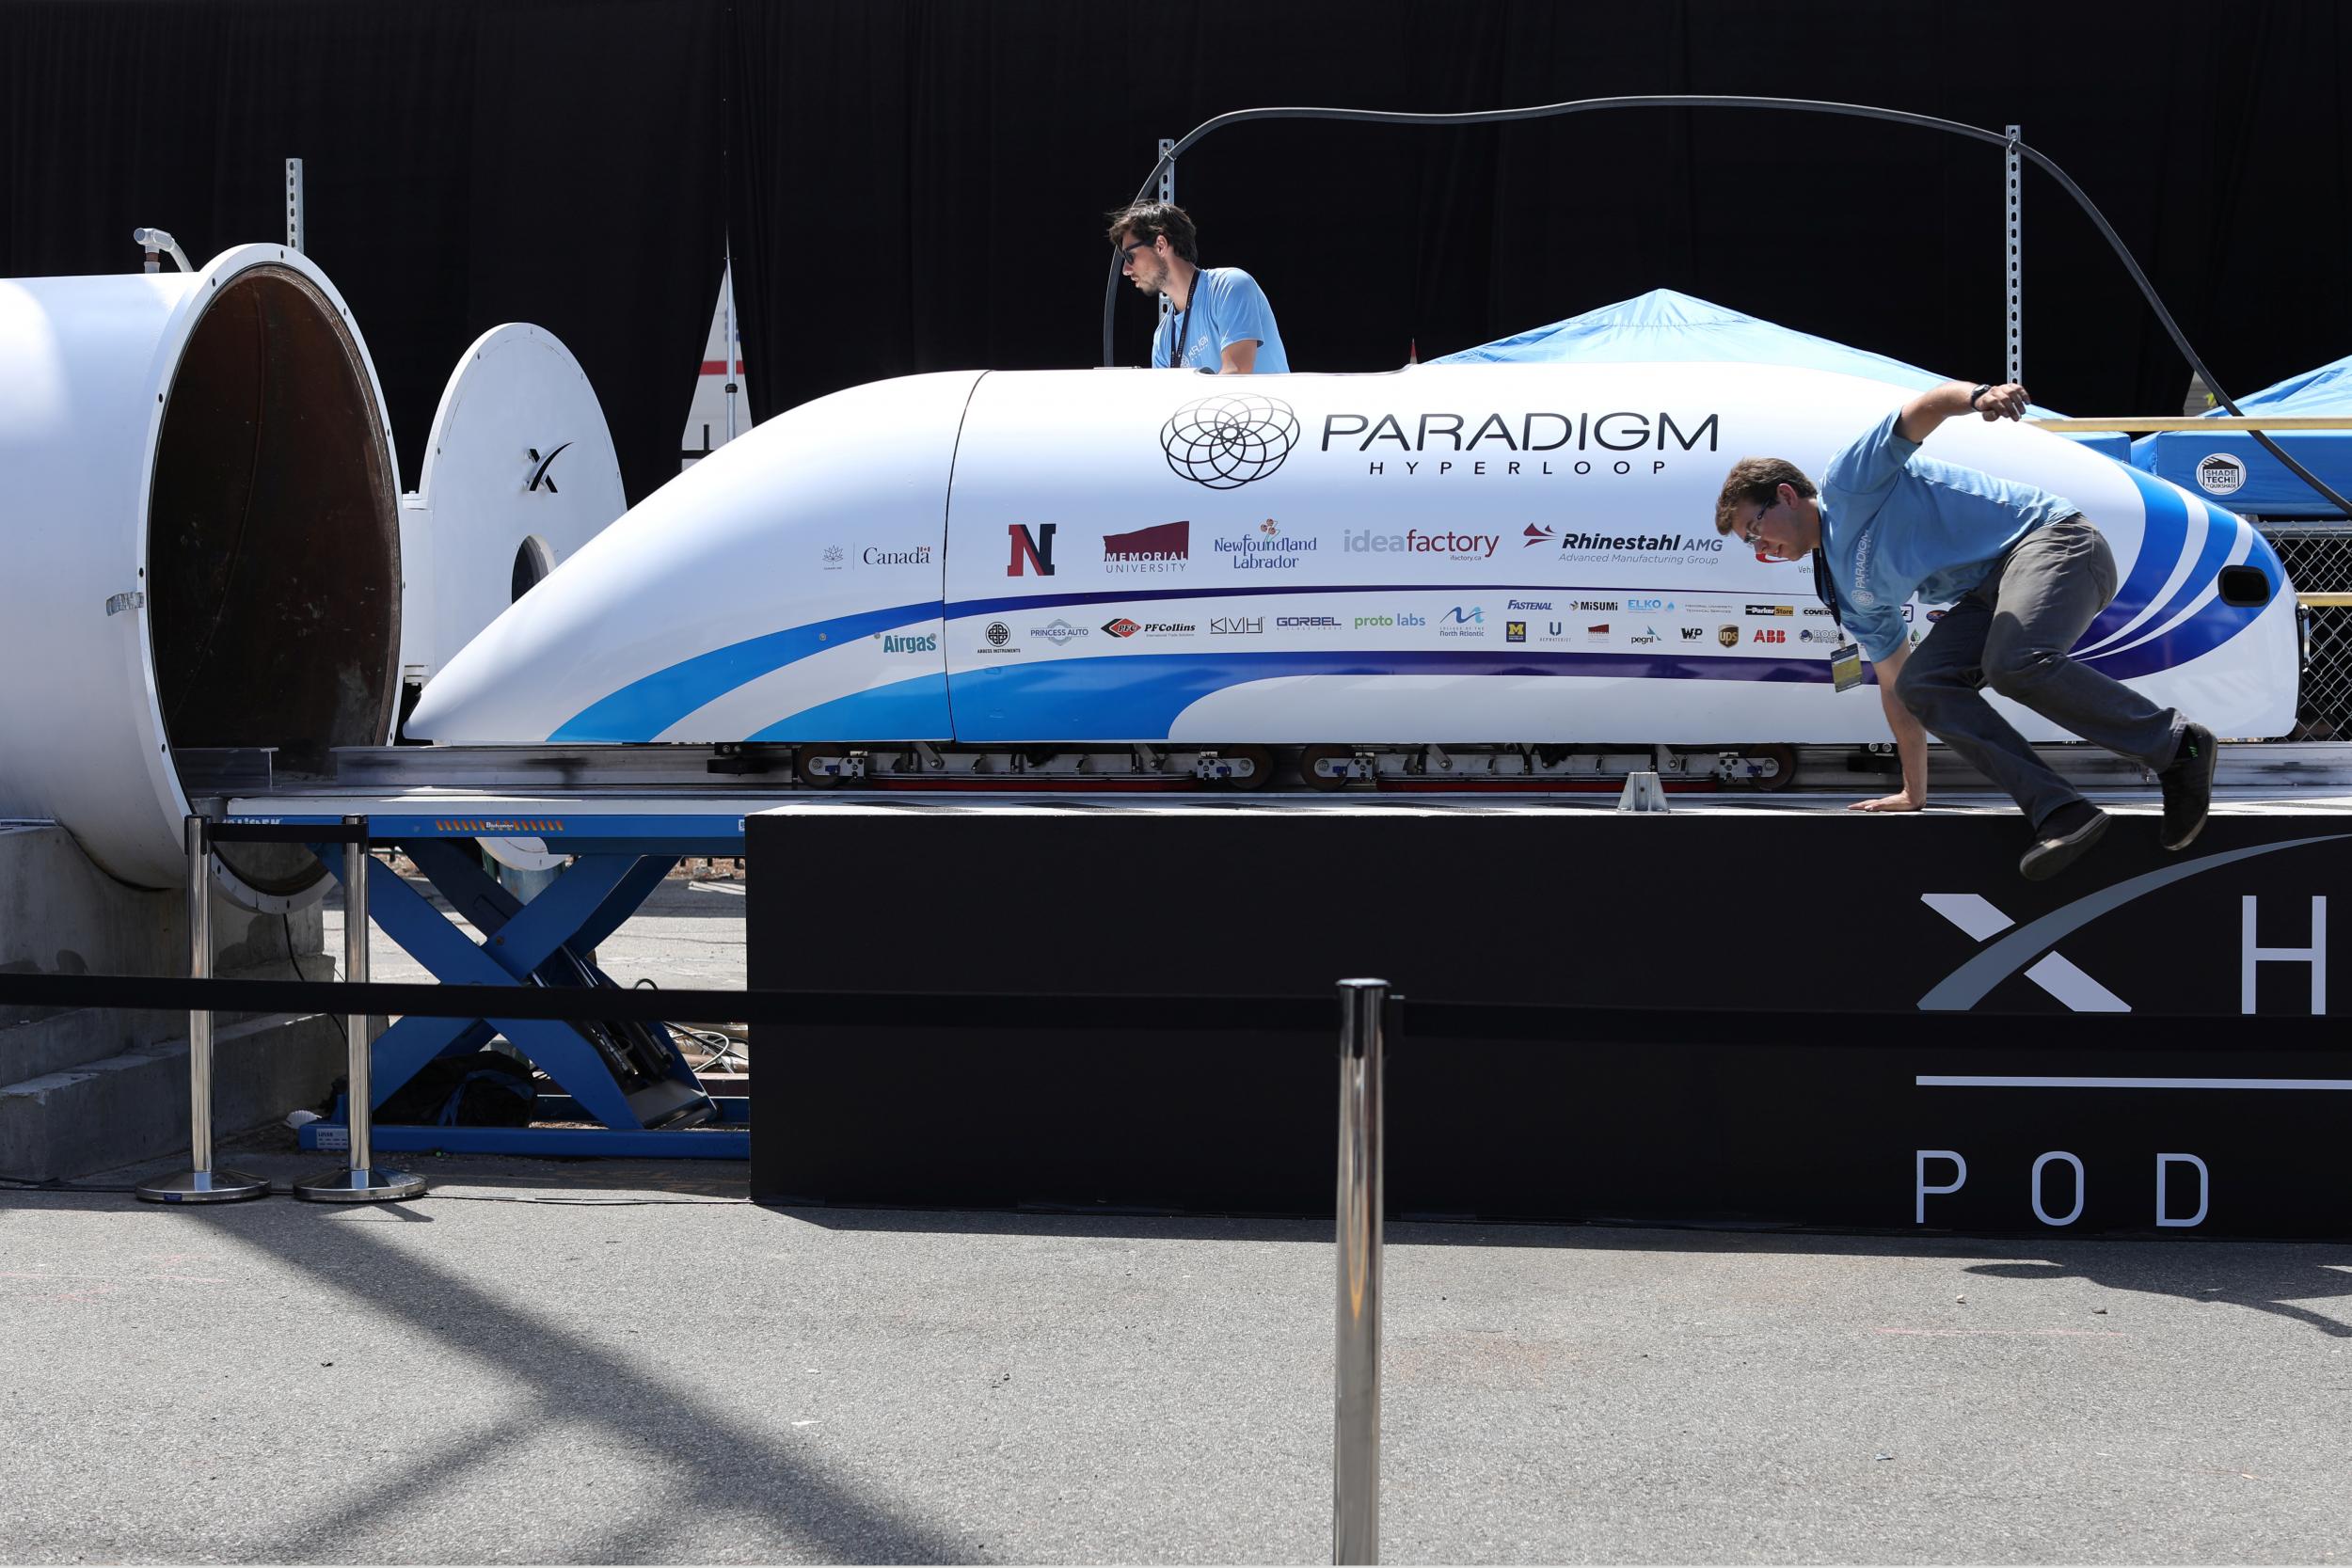 Hyperloop One pods matches the speed taken by planes due to its low drag